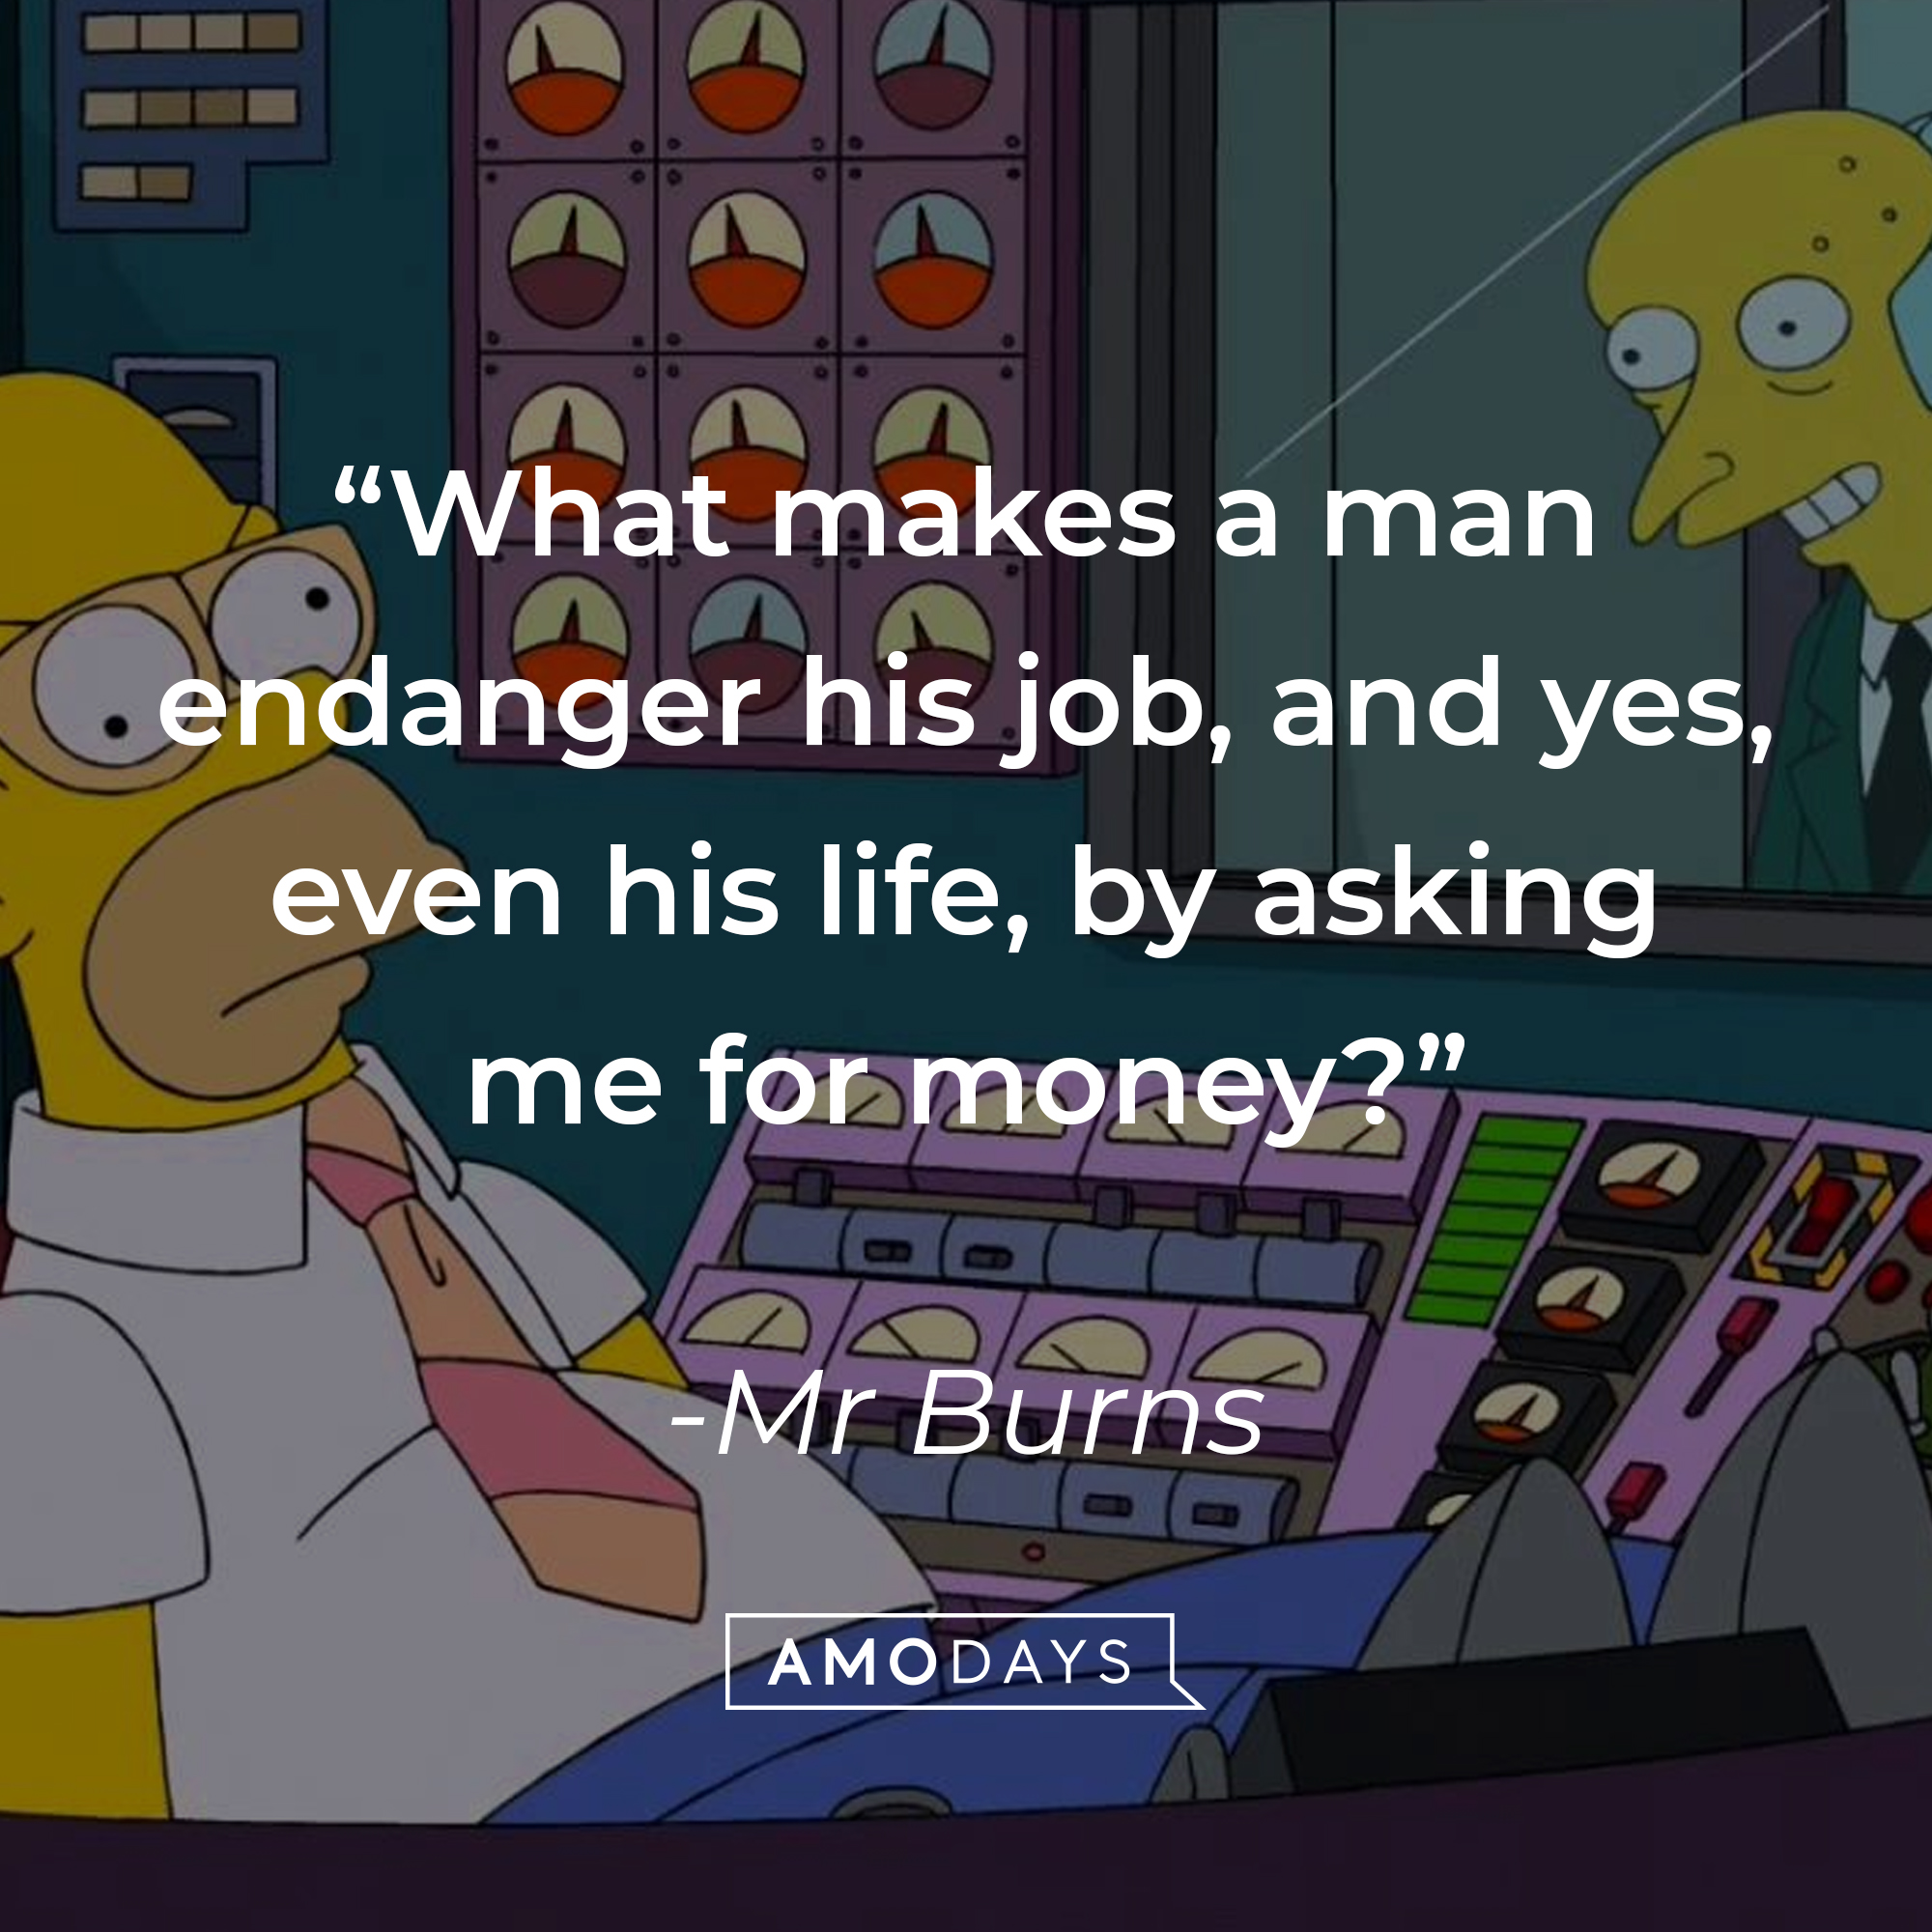 Mr. Burns' quote: "What makes a man endanger his job, and yes, even his life, by asking me for money?" | Source: facebook.com/TheSimpsons